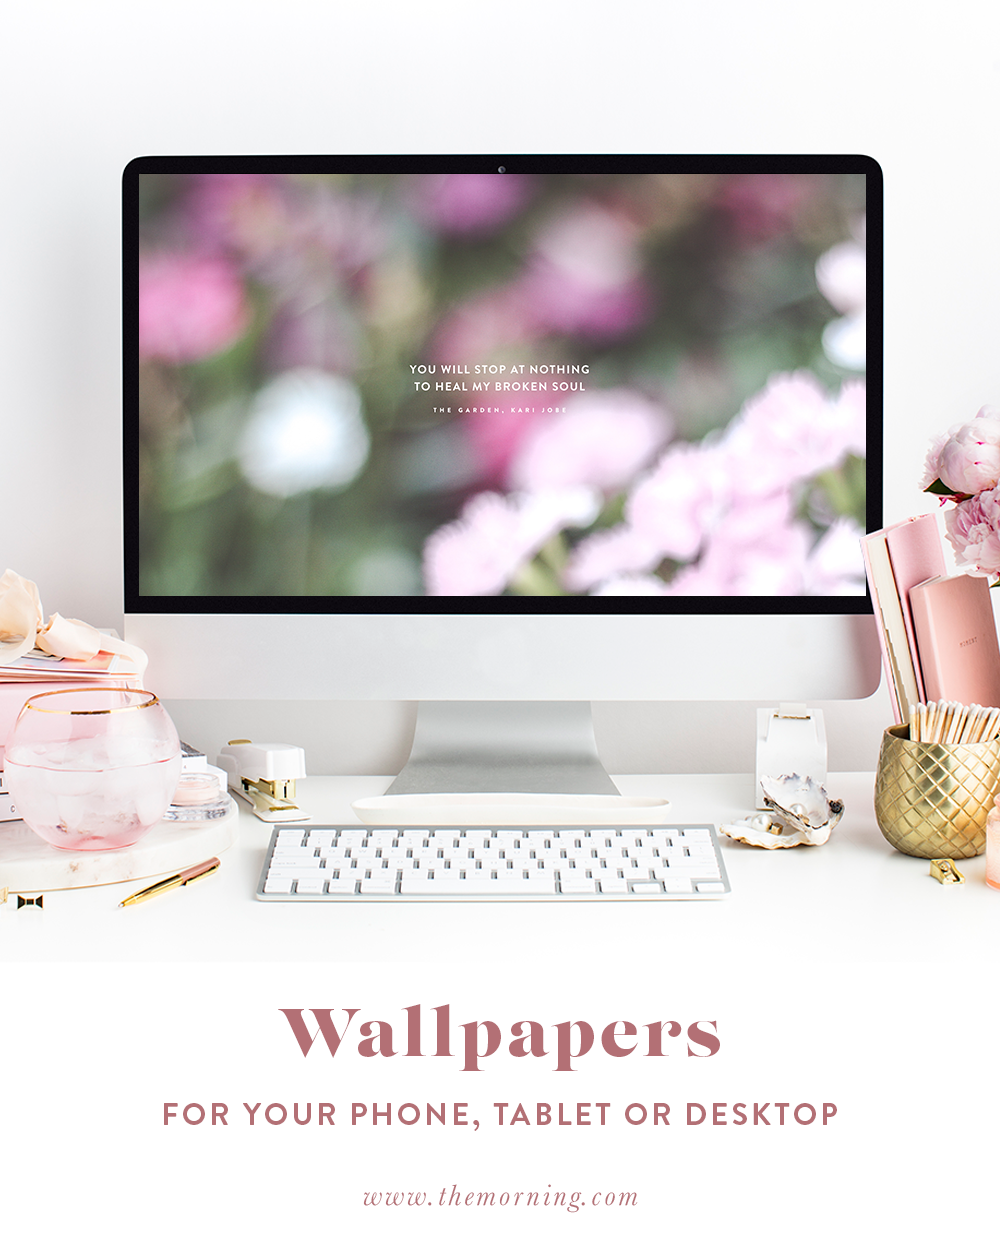 Free Wallpapers for your phone, tablet & computer with Bible Verse & Monthly Calendar | The Morning | A Community of hope for women finding joy after infant loss and miscarriage. | Ashlee Proffitt | The Morning | Miscarriage, Stillbirth, Infant Loss